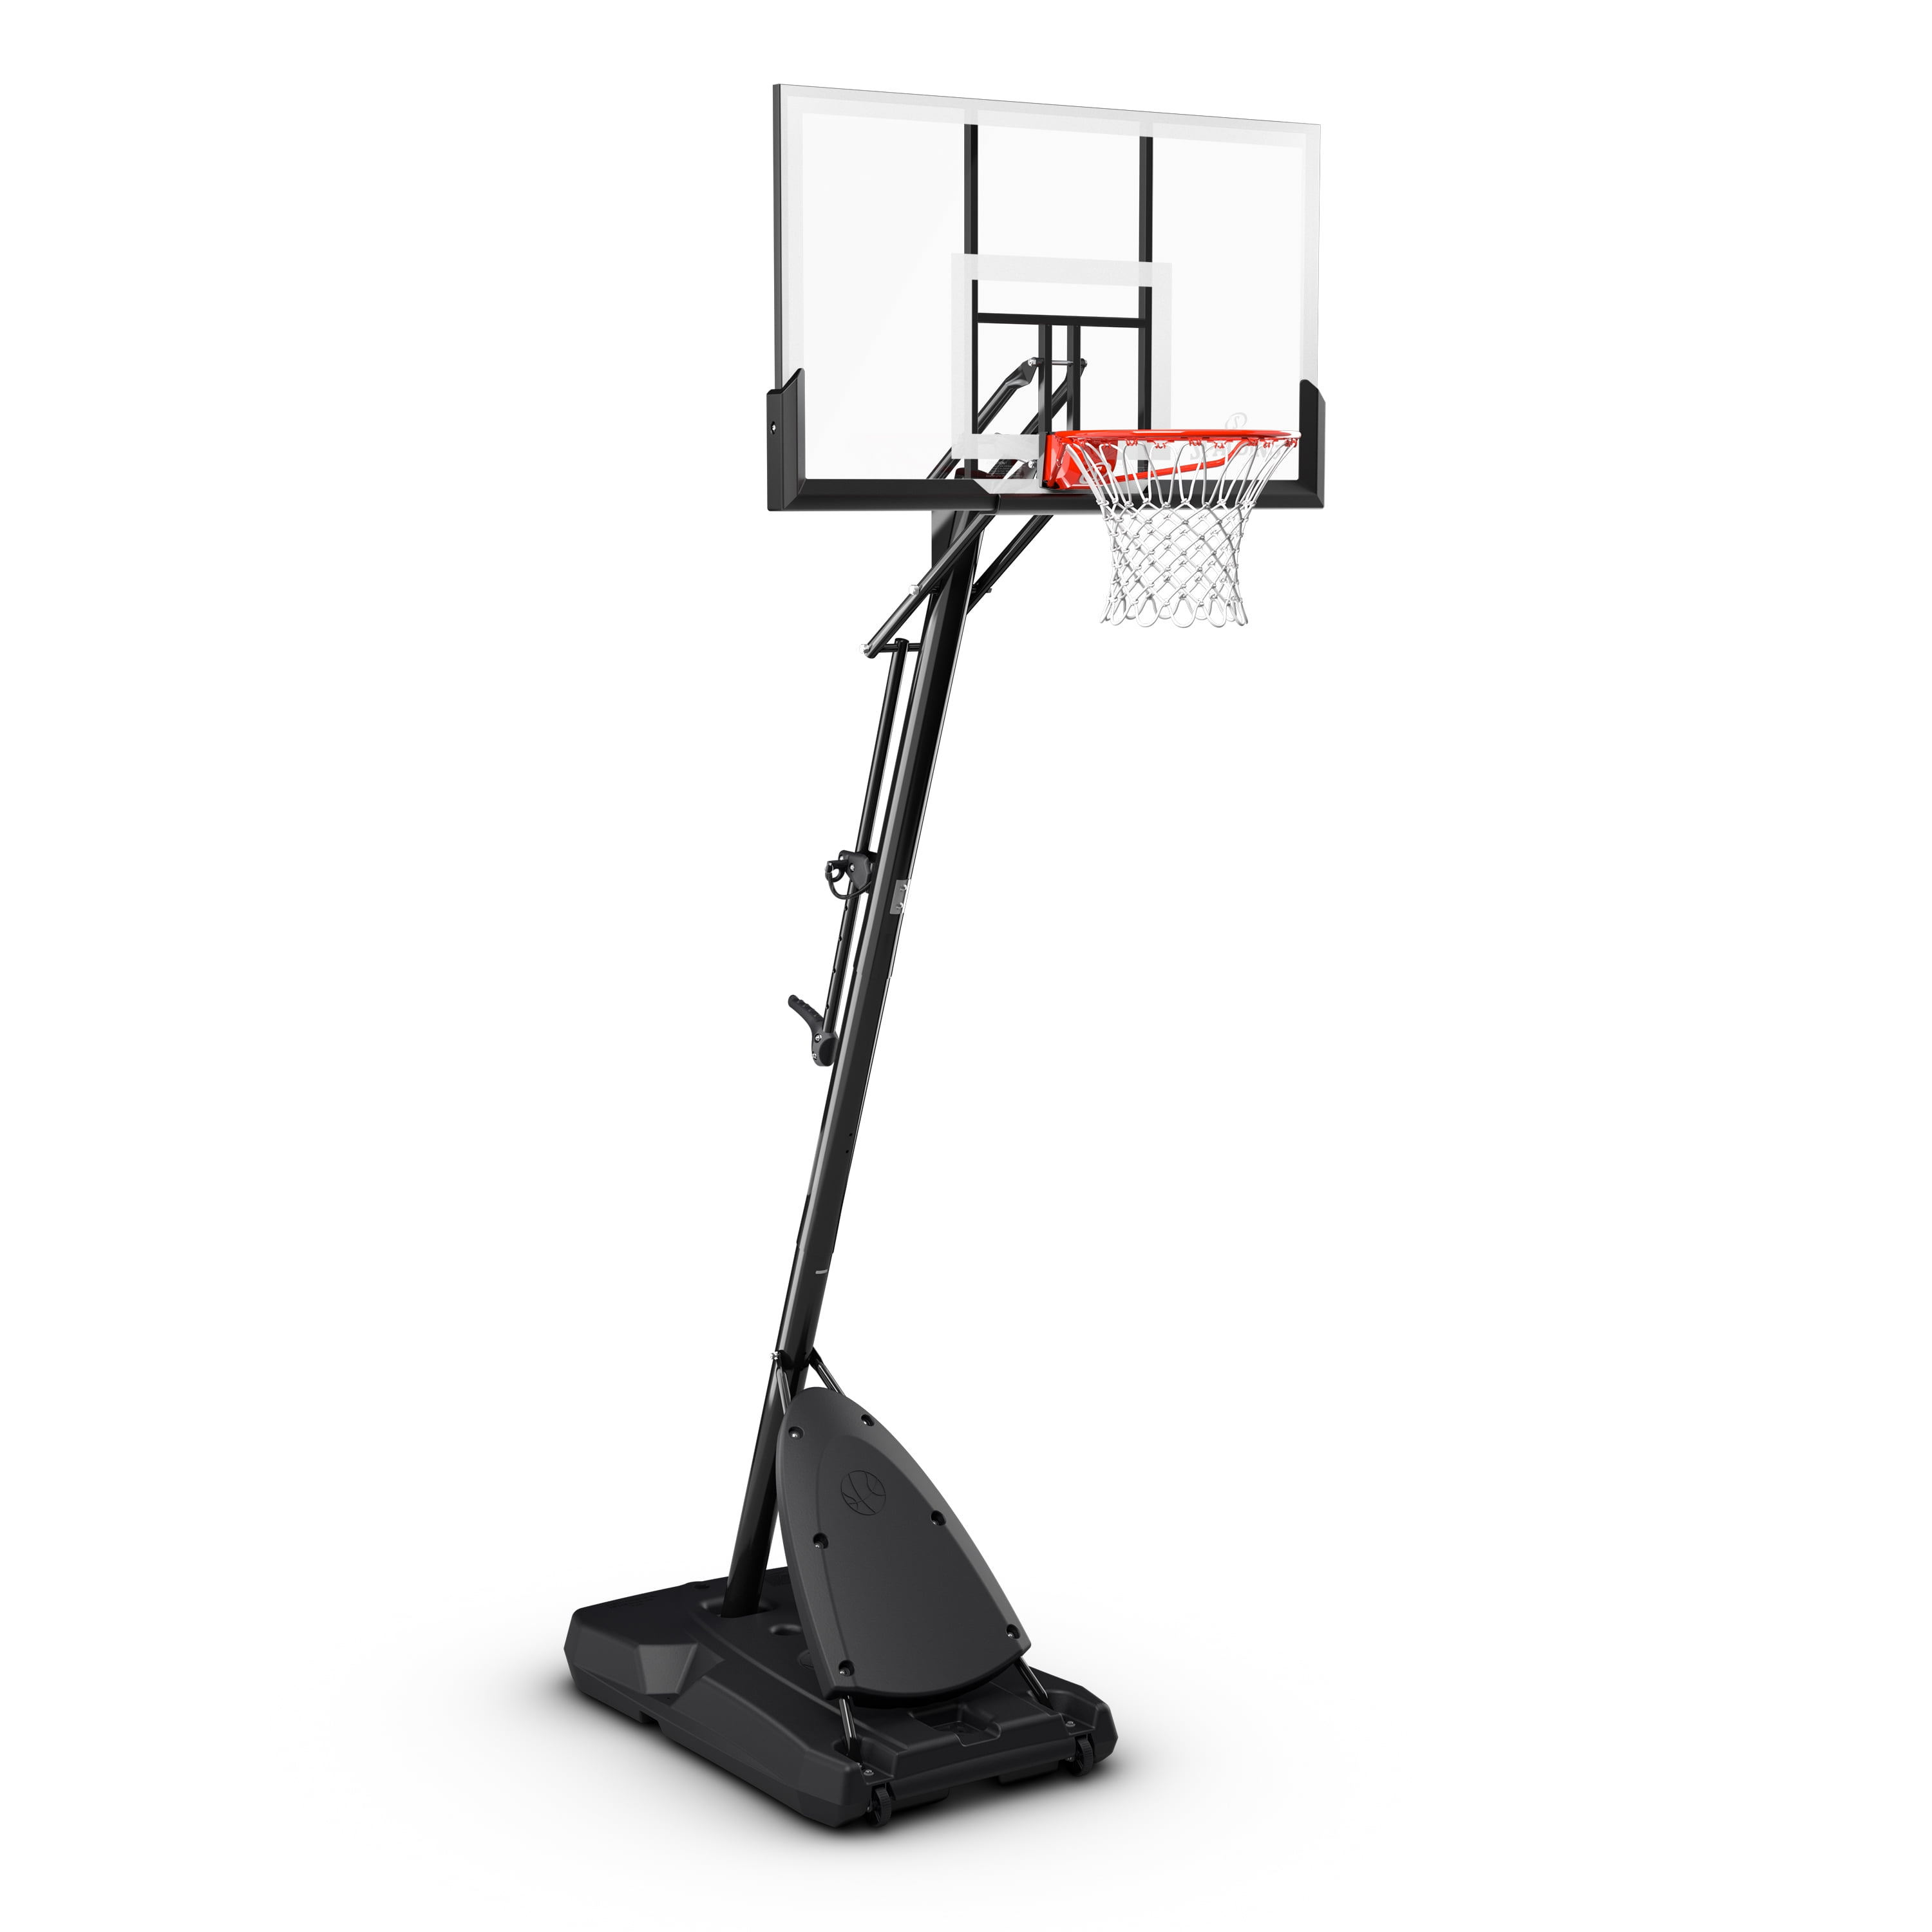 Spalding In. Shatter-proof Exacta height® Portable Basketball System -